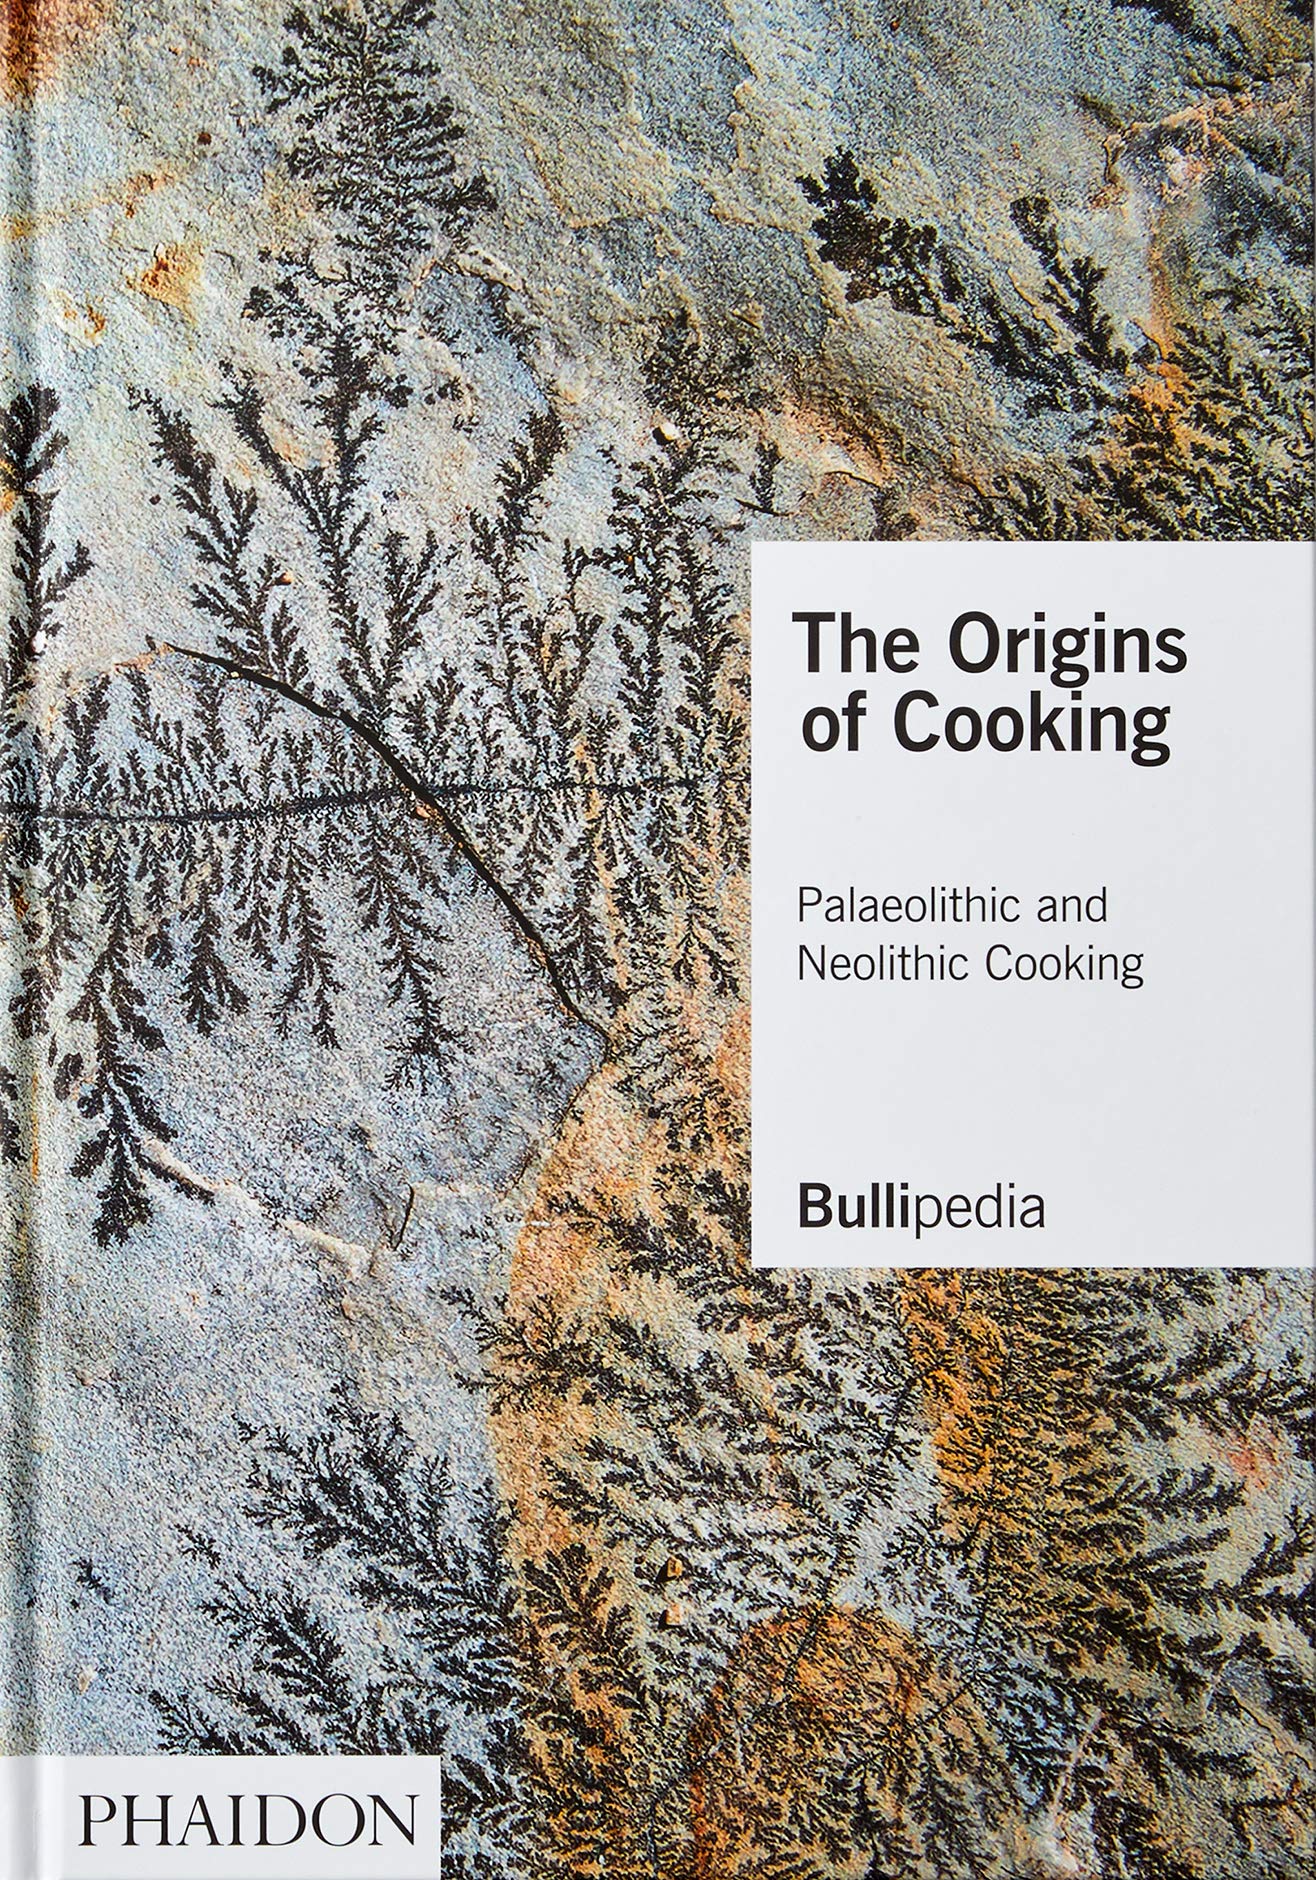 THE ORIGINS OF COOKING